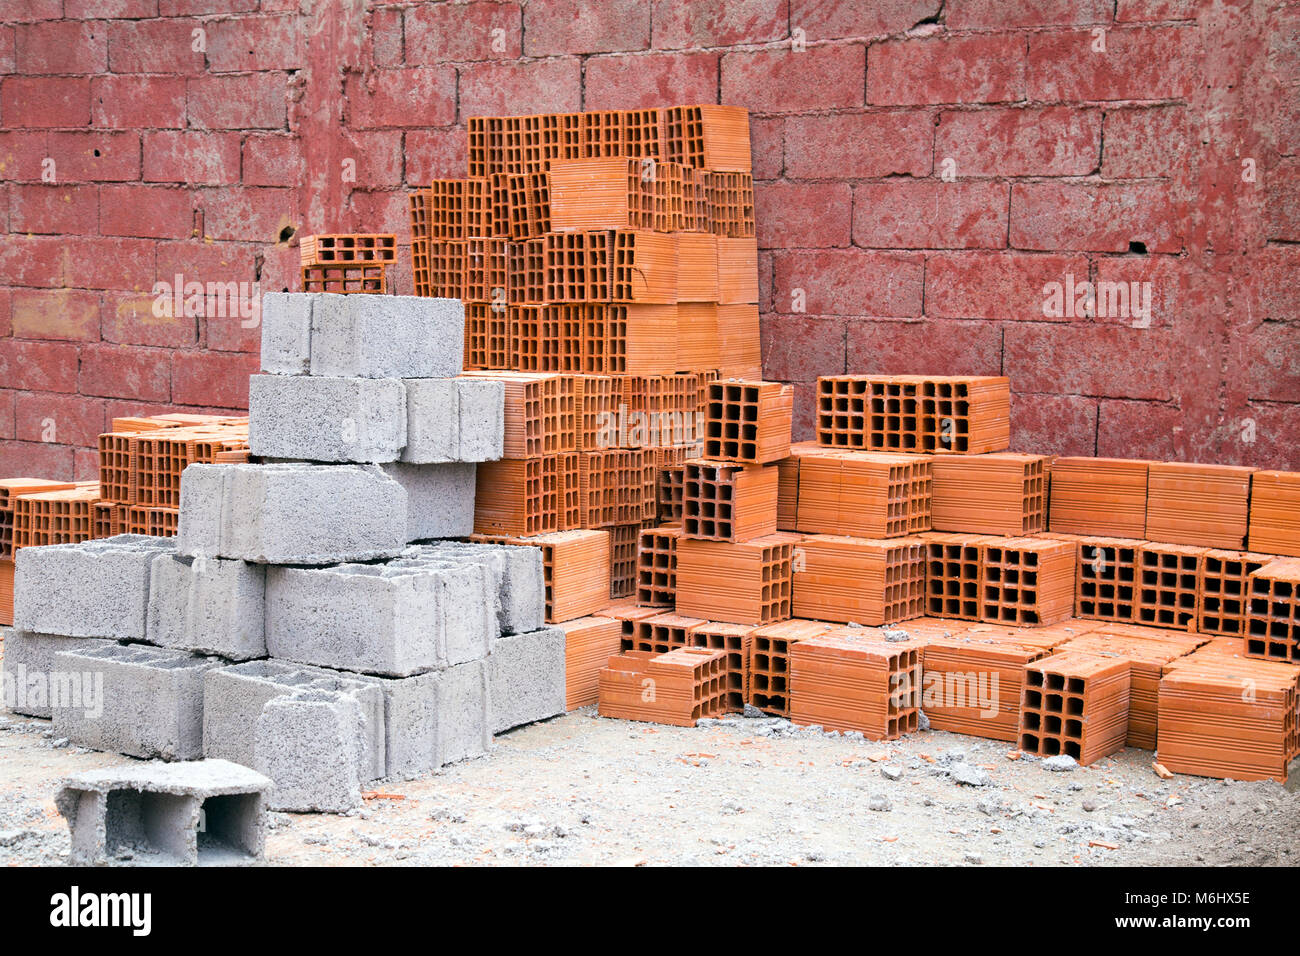 Stacks of grey and red bricks on a building site Stock Photo